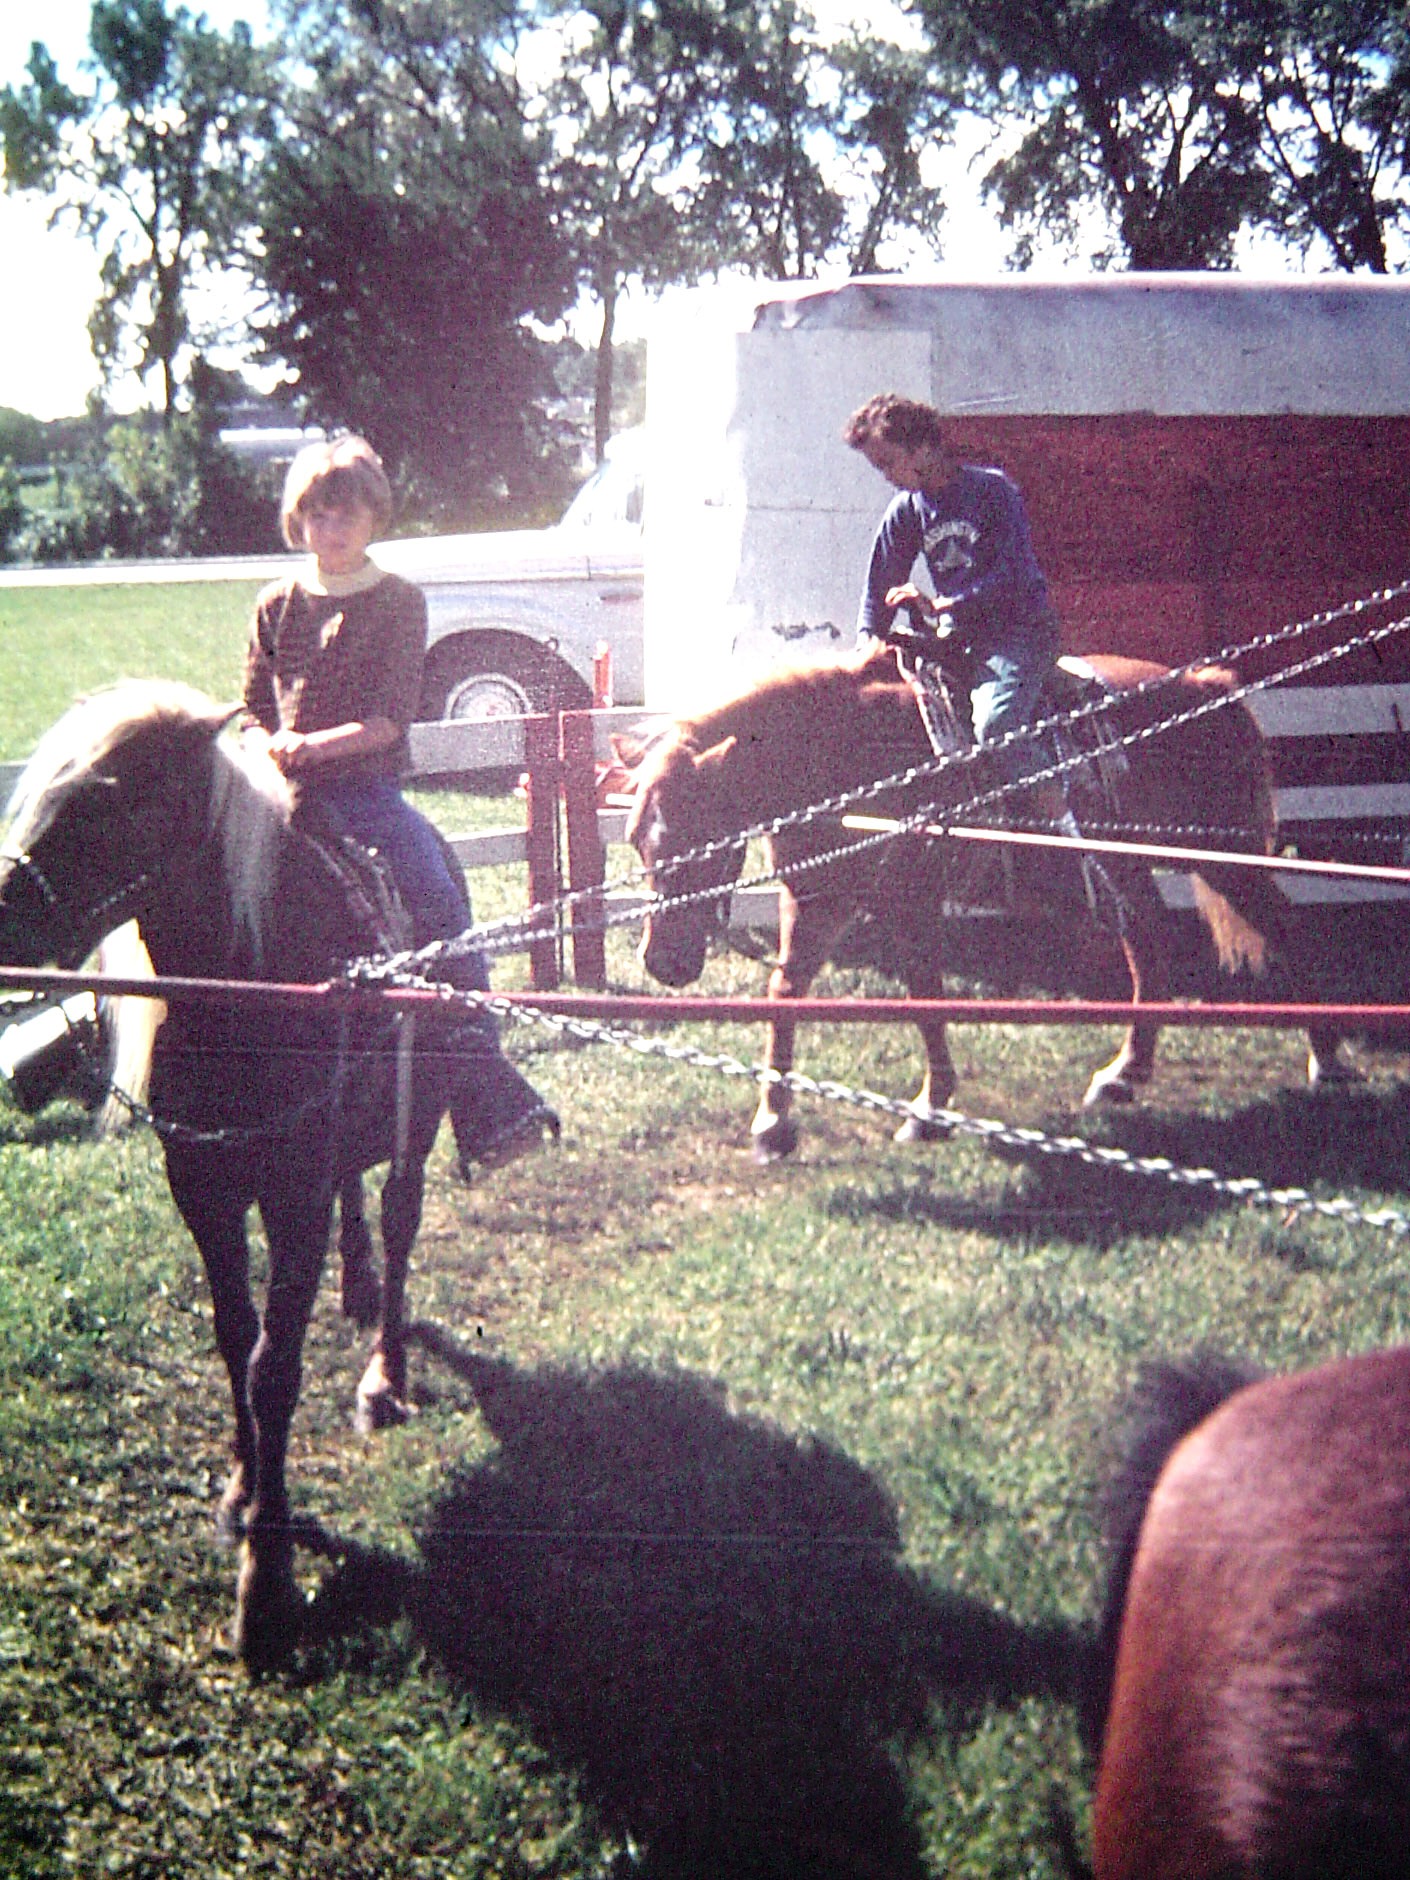 Pony rides at Westmorland neighborhood 4th of July, ca. 1968